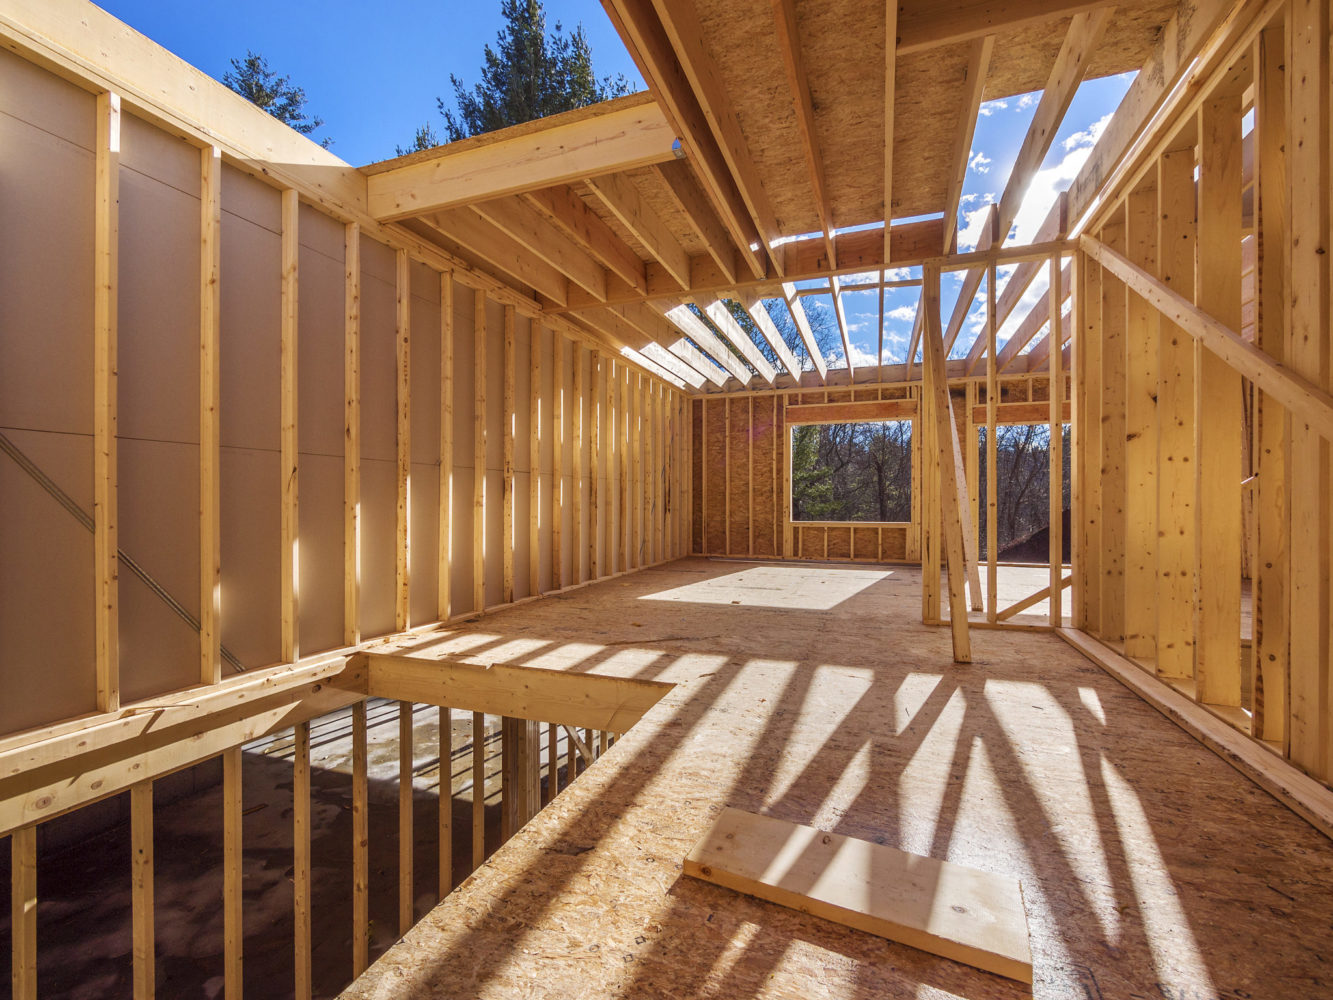 How Much Is Builders Risk Insurance For A New Home Build Or Renovation? - ALIGNED Insurance Brokers